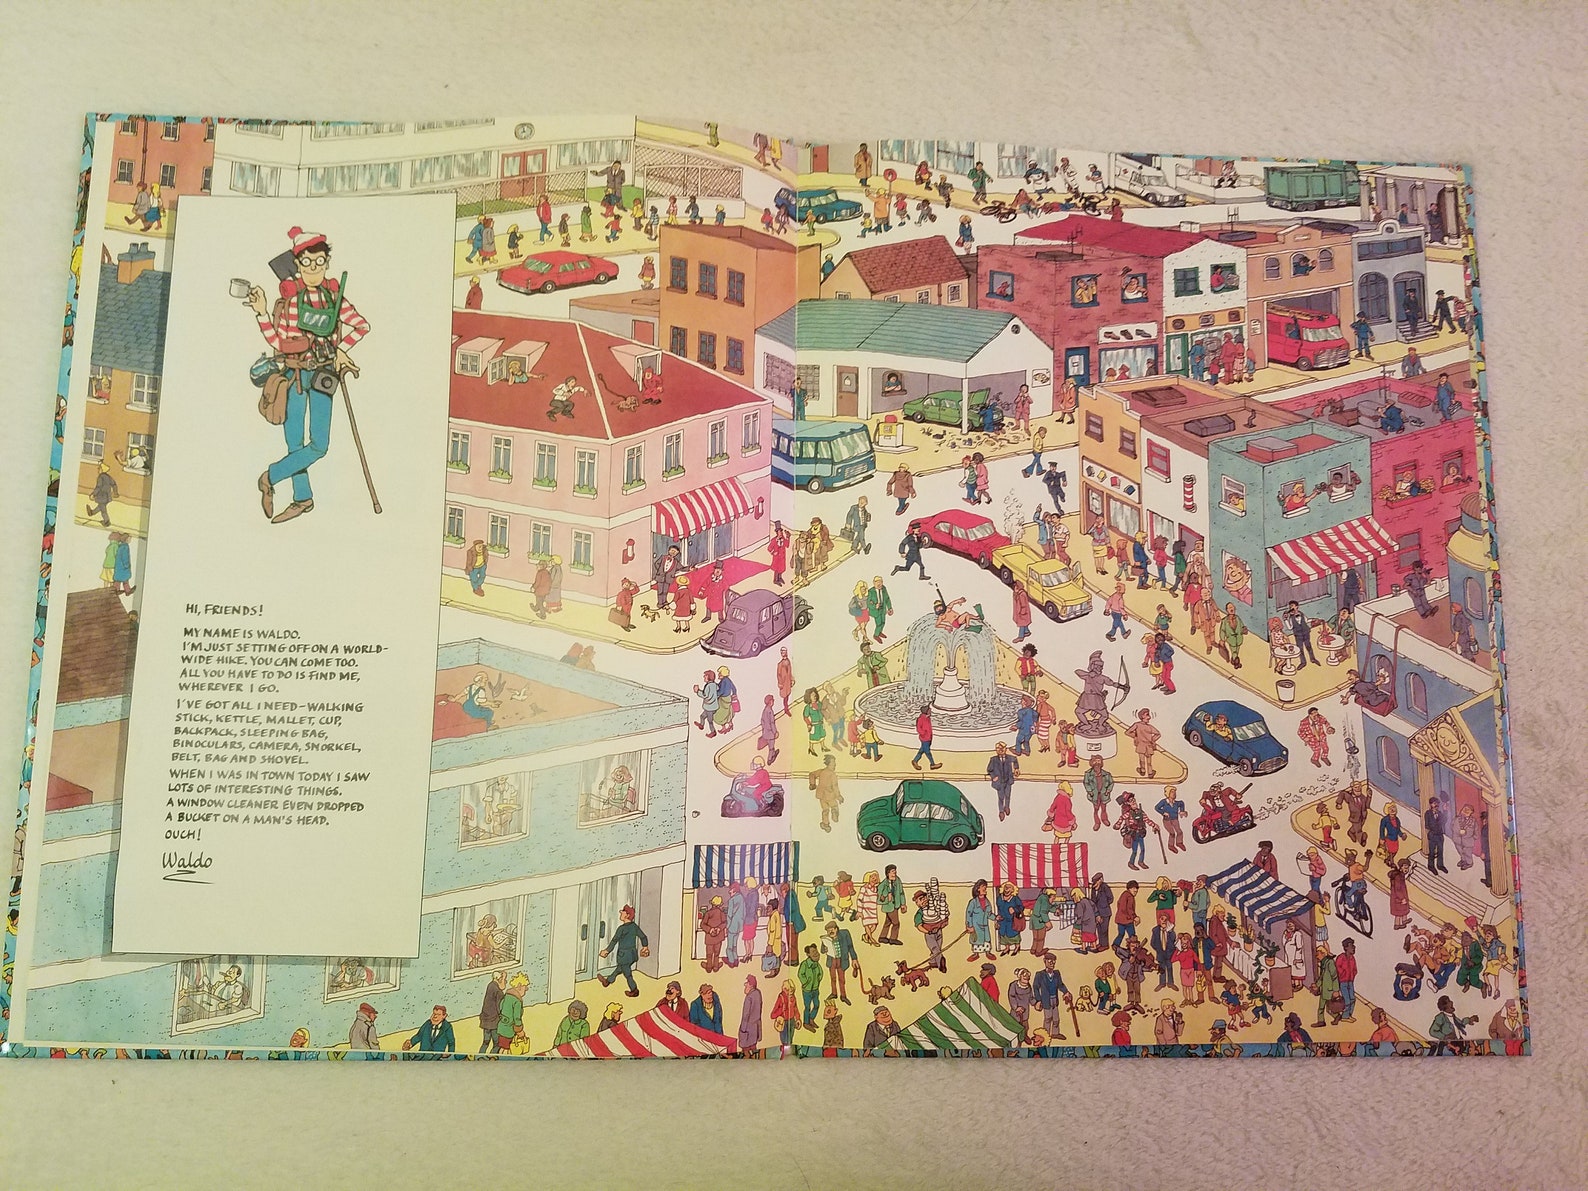 Where S Waldo Rare Banned Book Shows Topless Sunbather Etsy